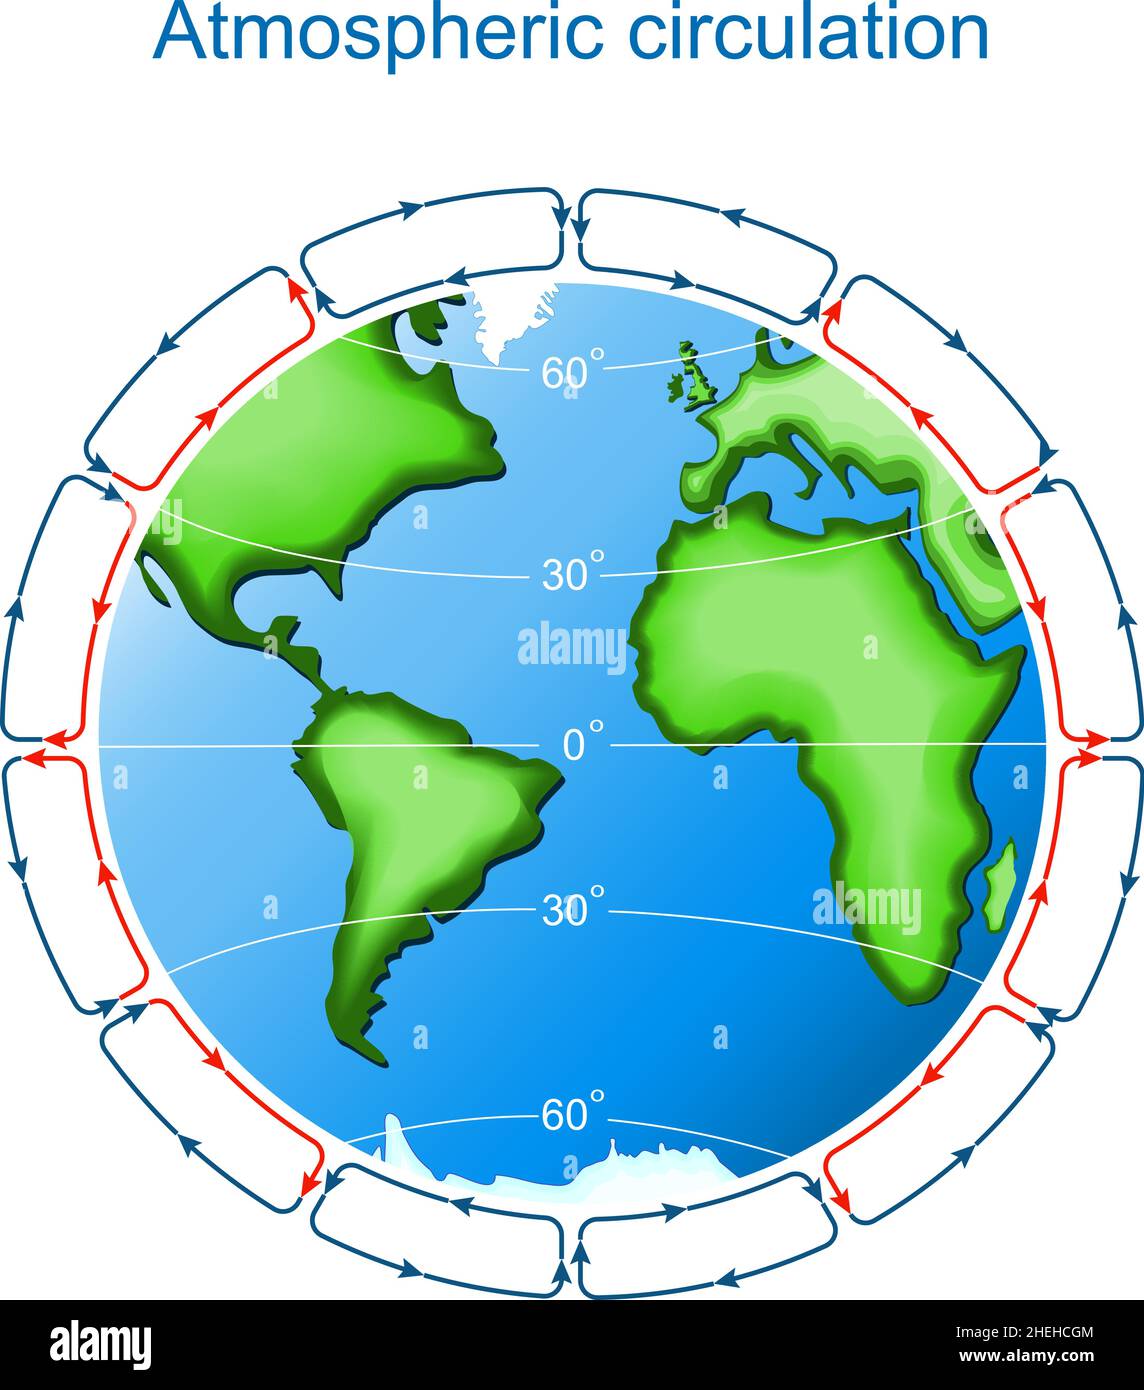 Atmospheric circulation on Earth. surface winds on planet. Circulation of Atmosphere. Global circulation patterns or Hadley-Ferrel Model. Vector Stock Vector